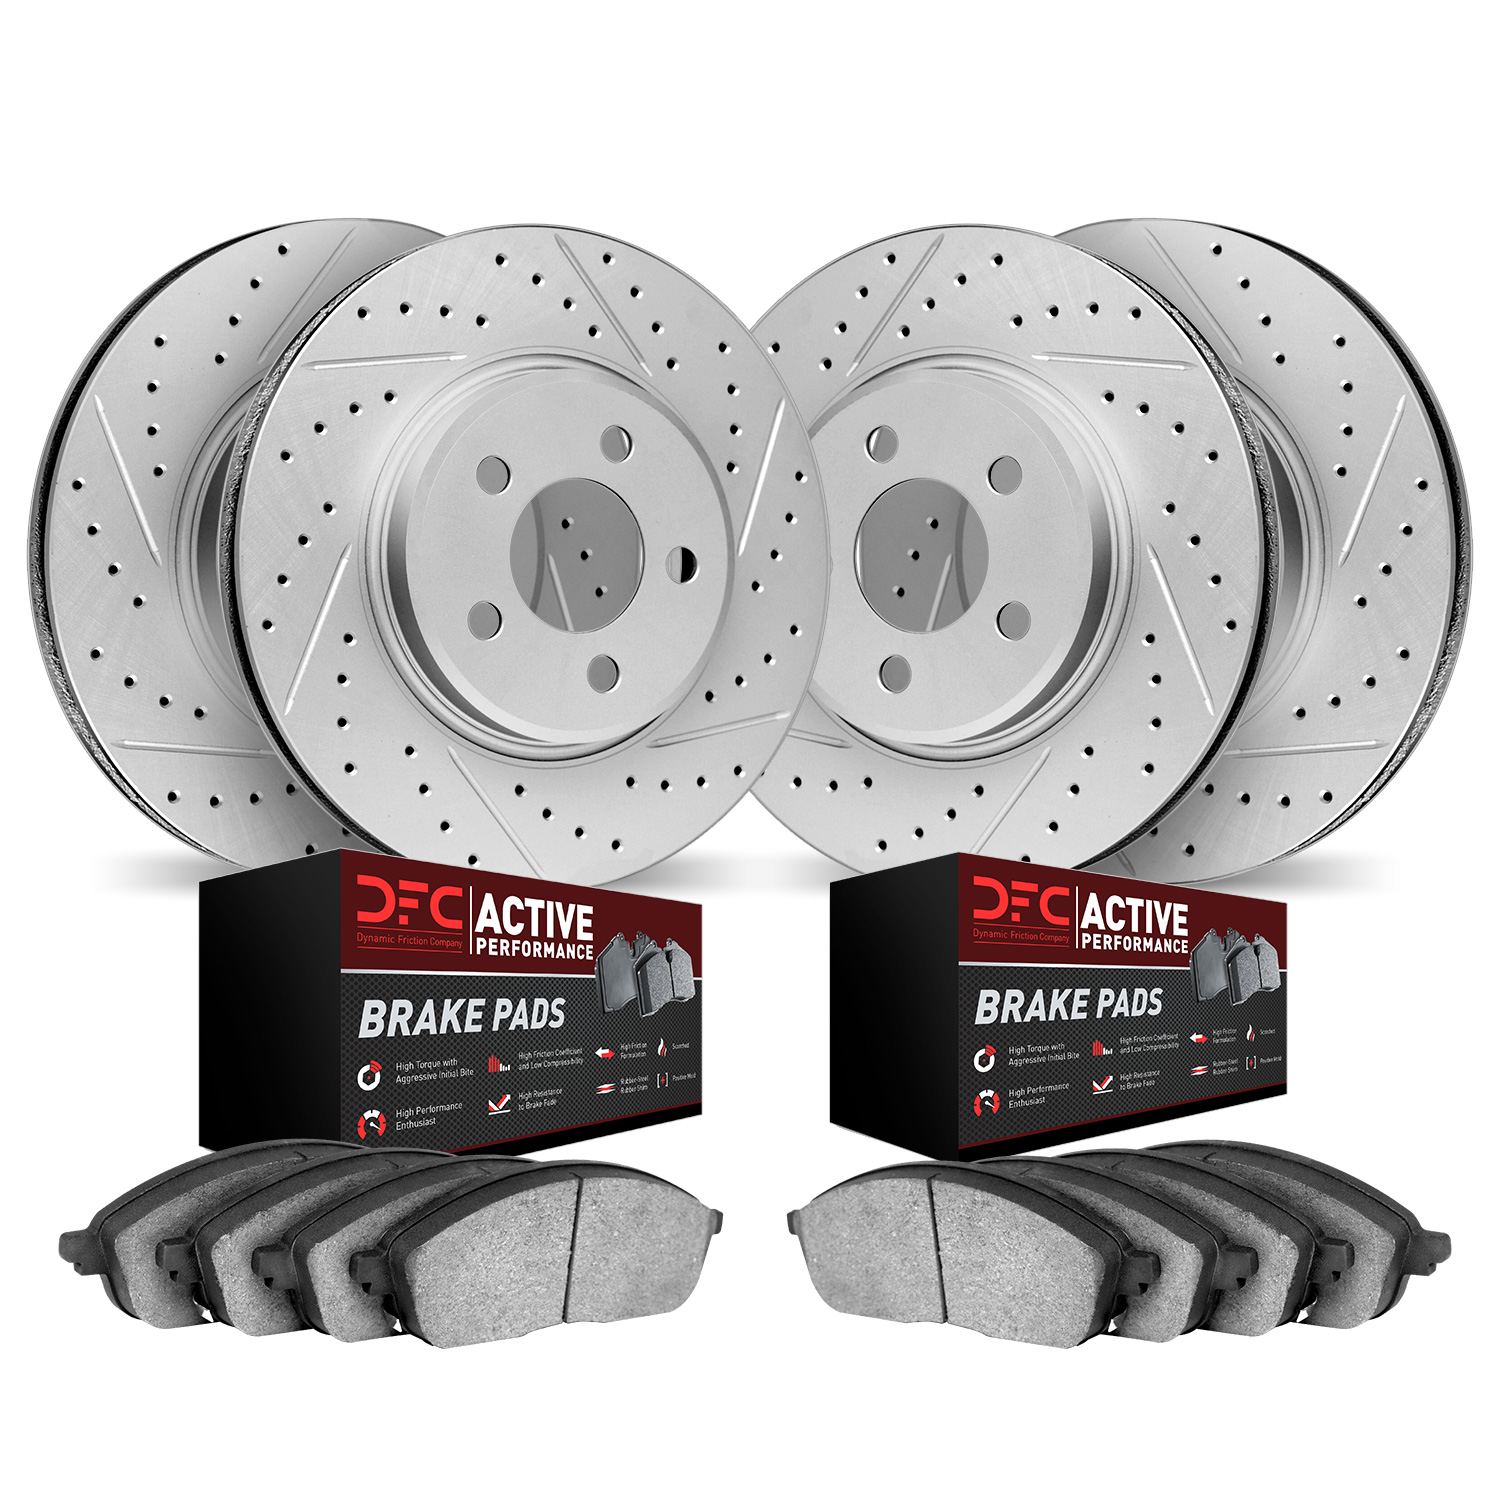 2704-67003 Geoperformance Drilled/Slotted Brake Rotors with Active Performance Pads Kit, 1989-1996 Infiniti/Nissan, Position: Fr